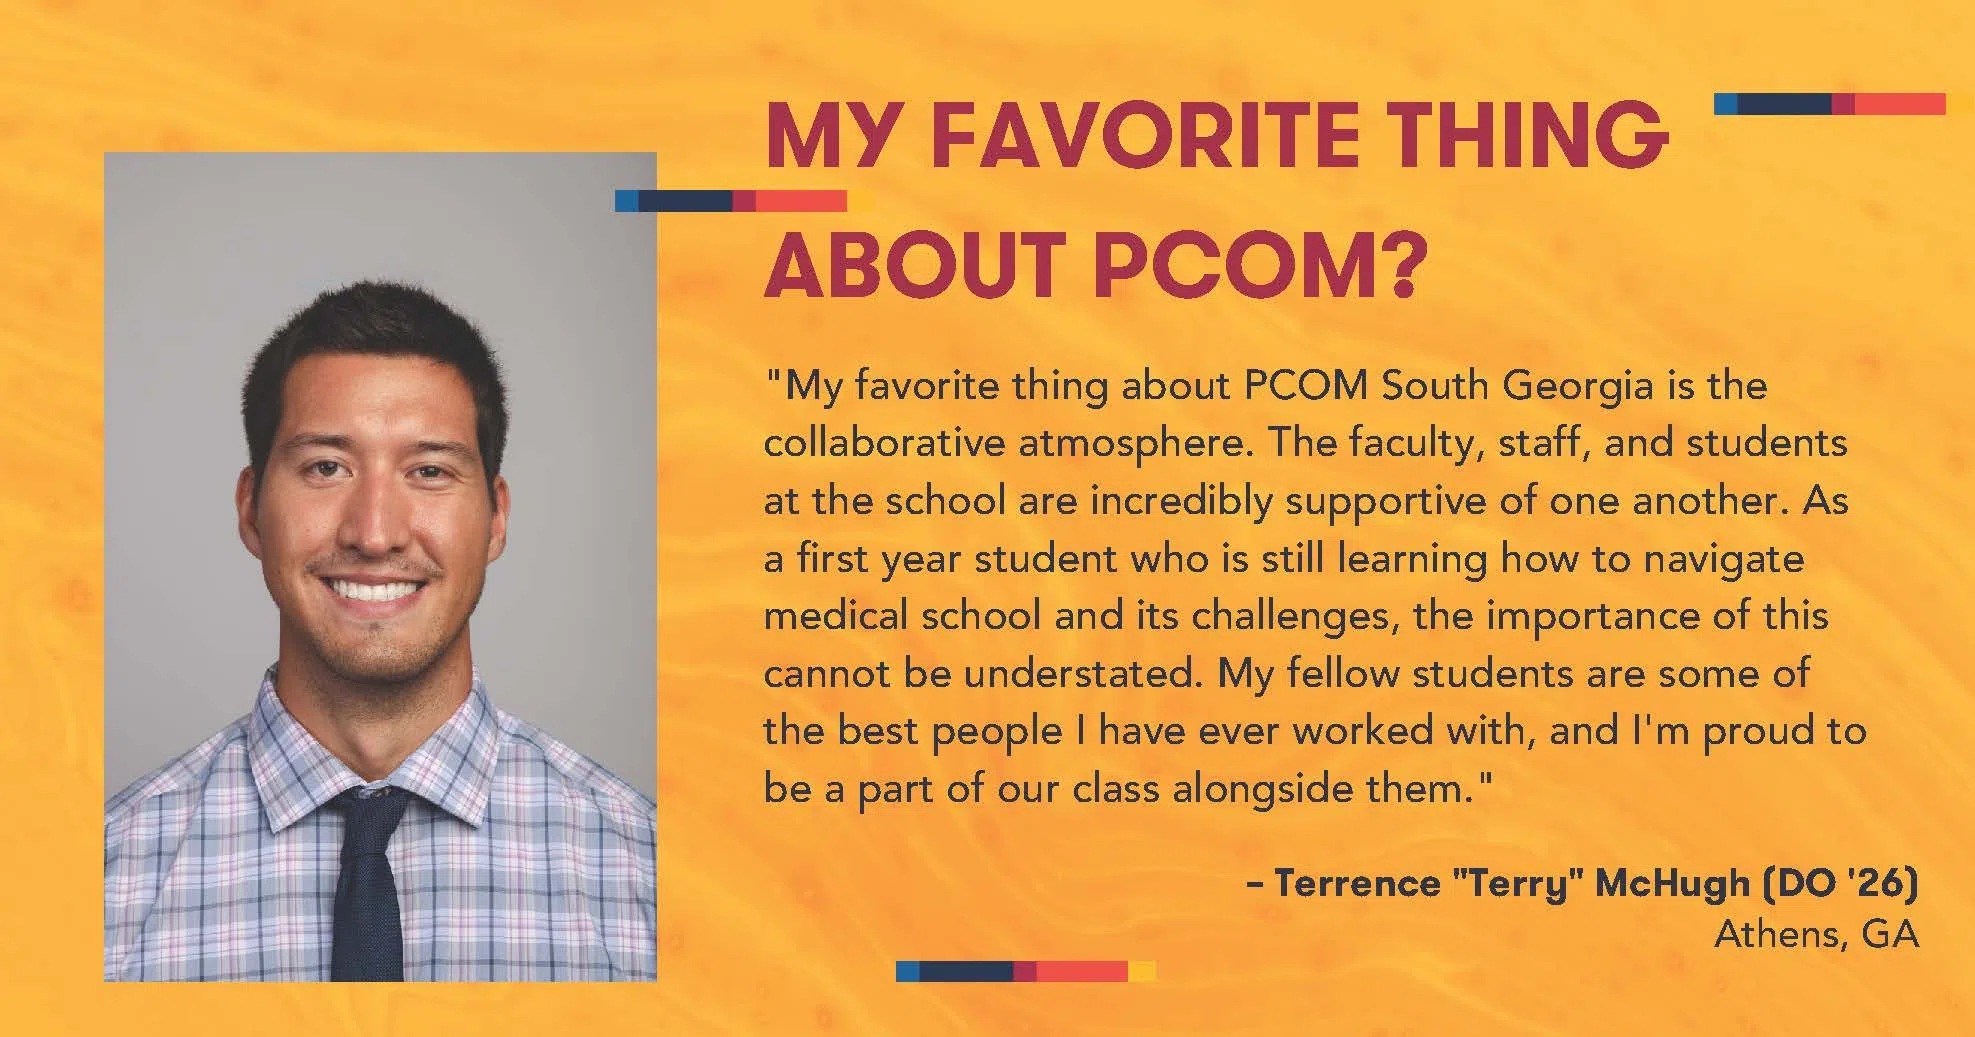 Thoughts from Student Ambassador about his favorite thing at PCOM